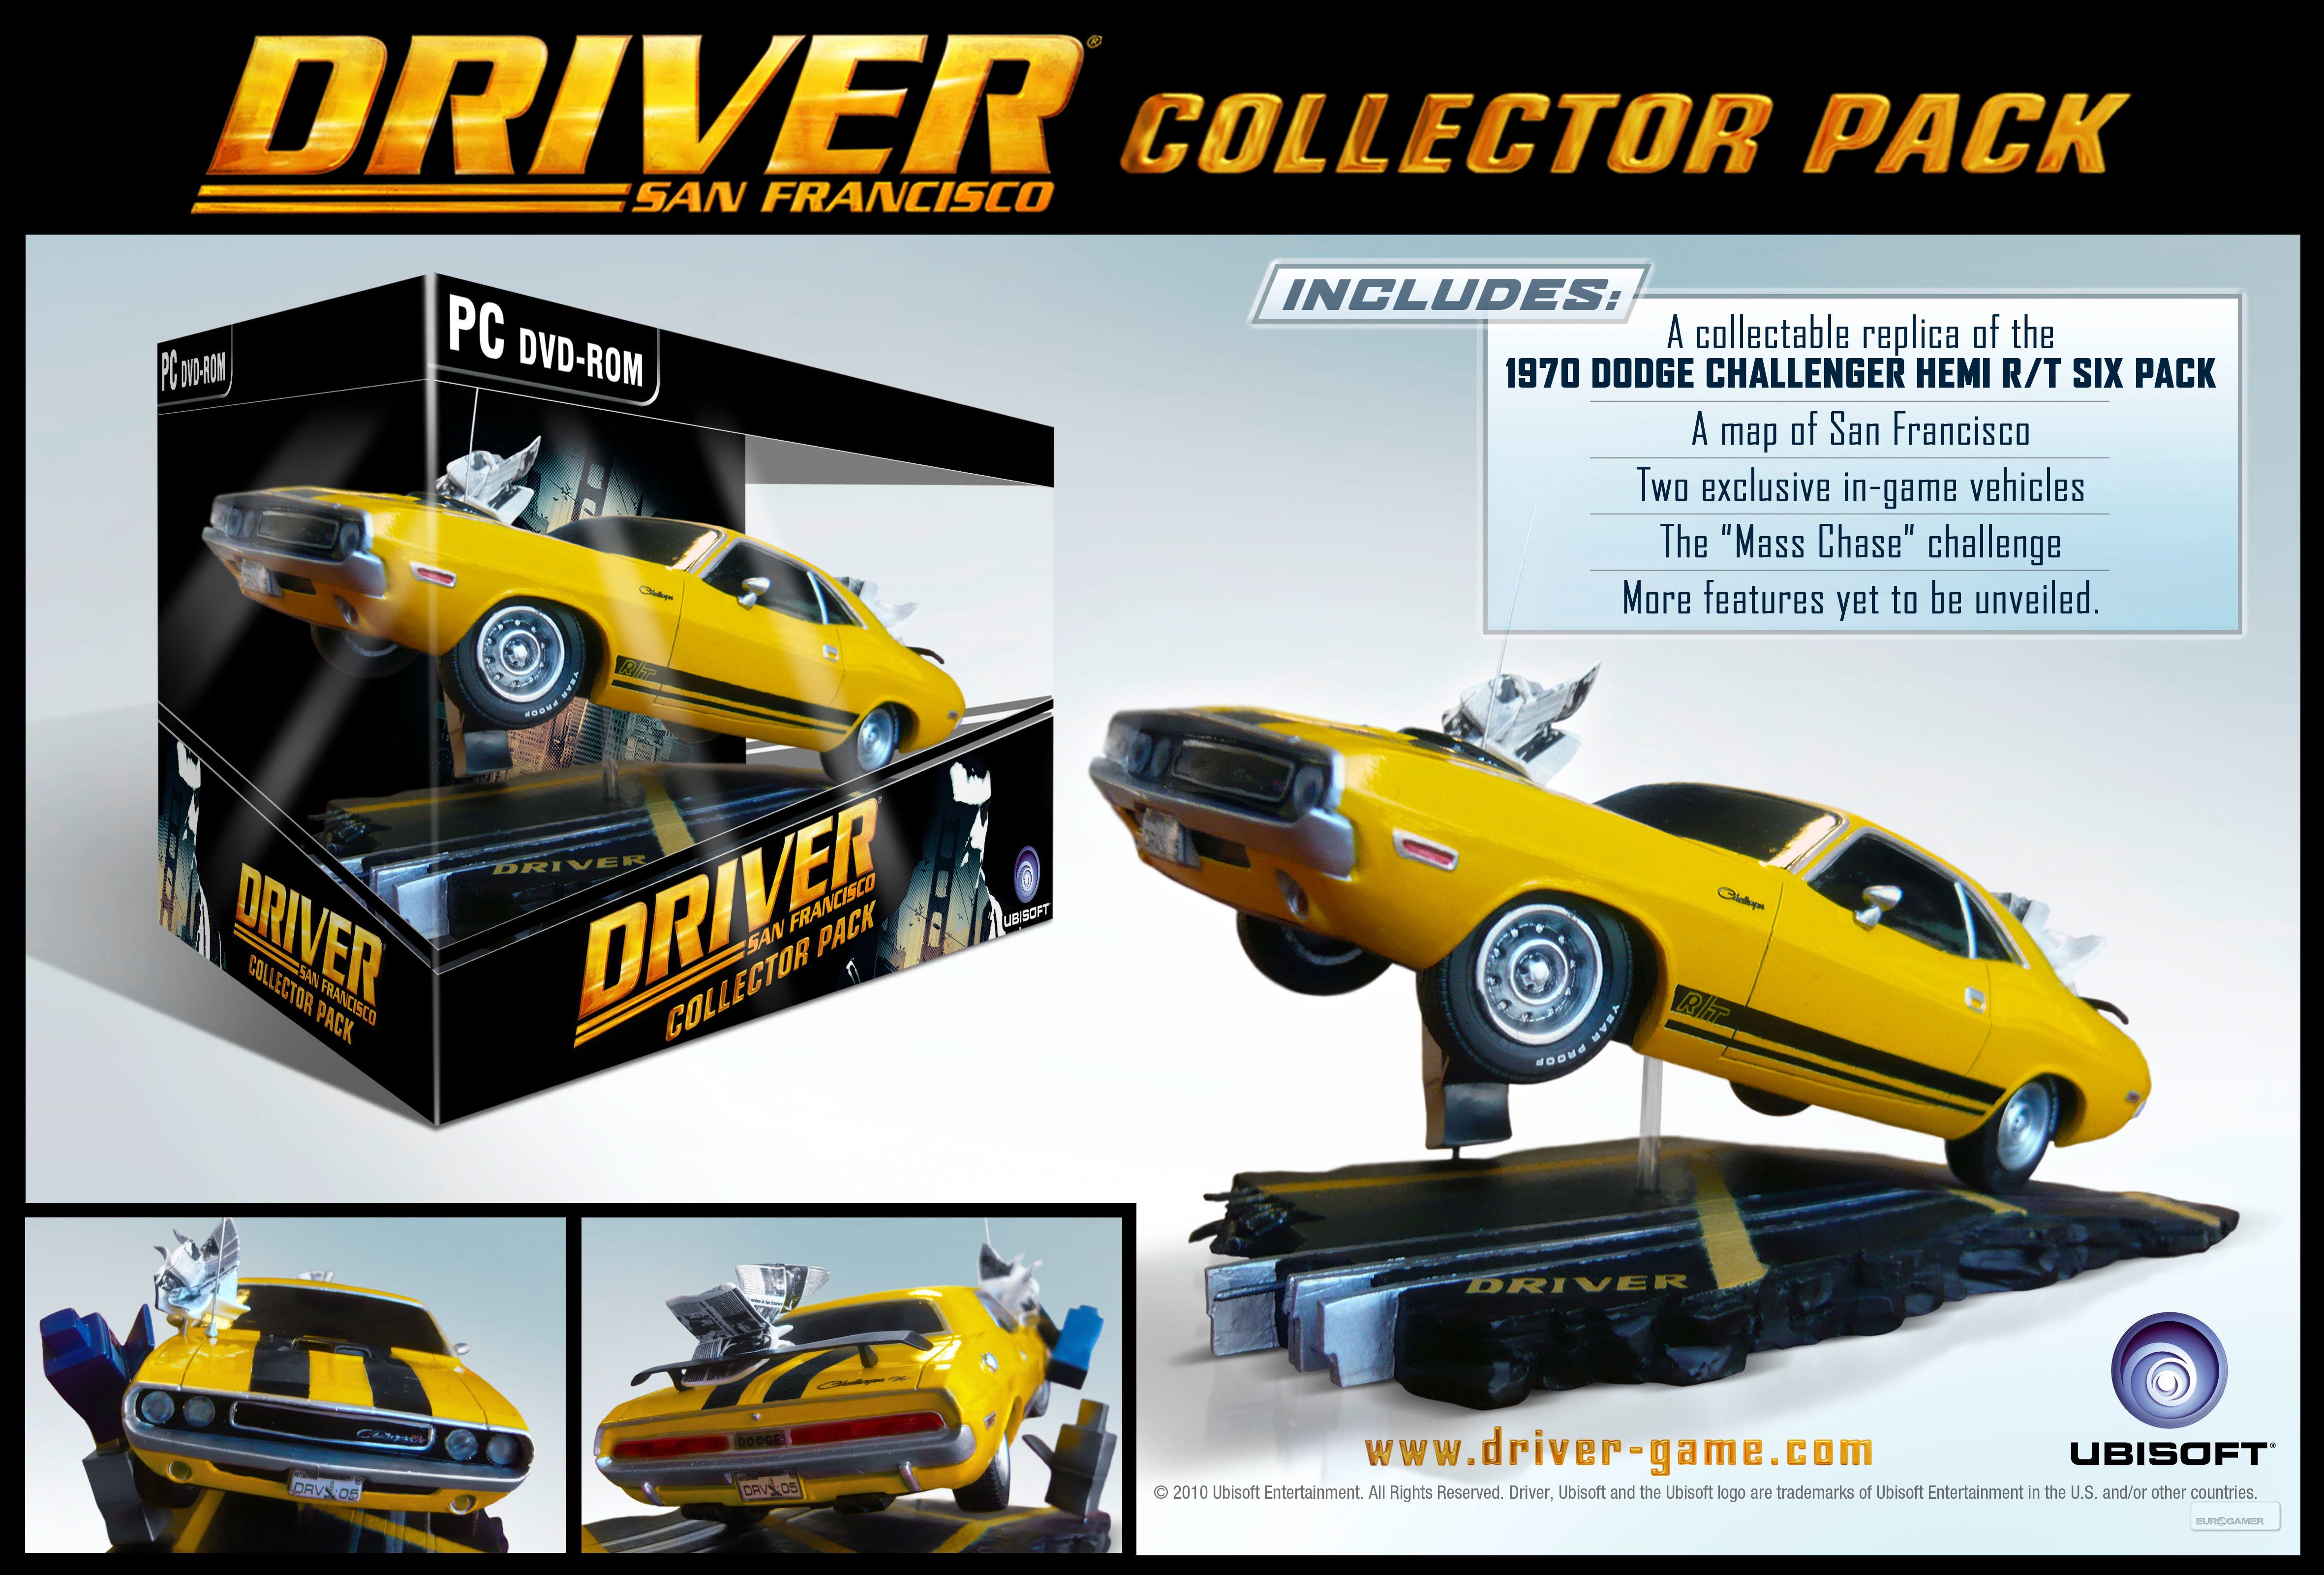 Drive collection